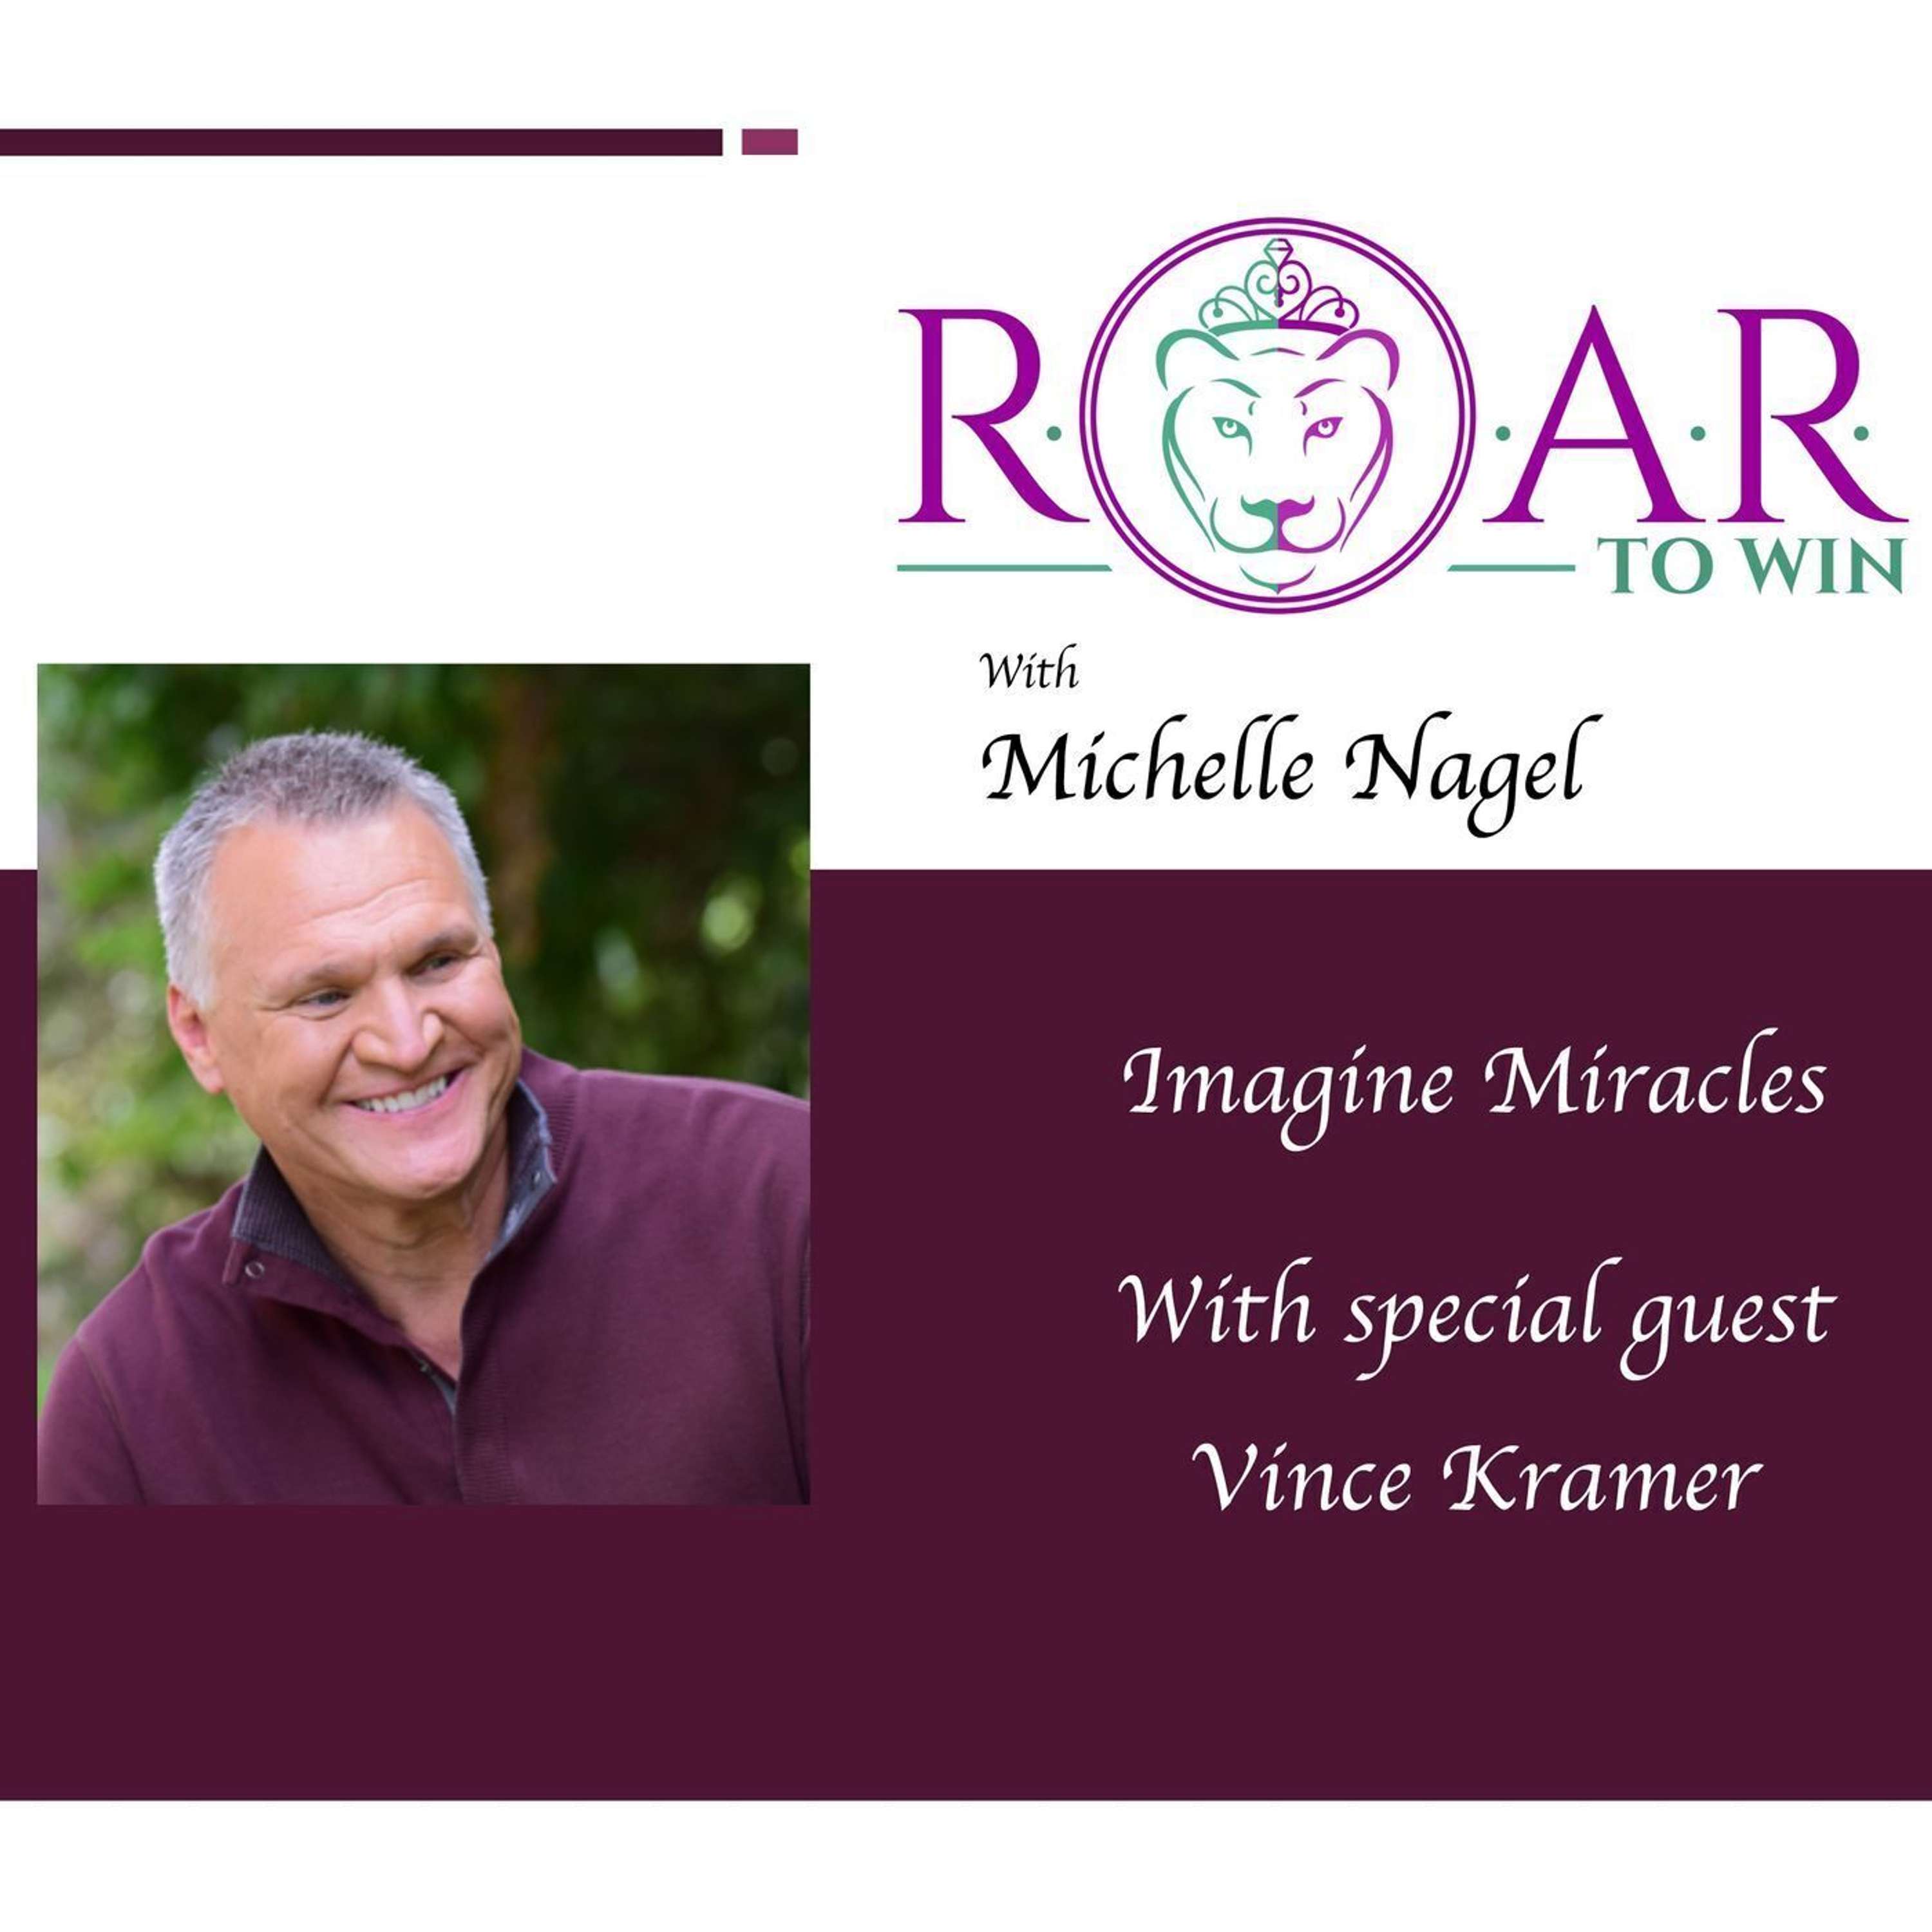 Imagine Miracles with Vince Kramer